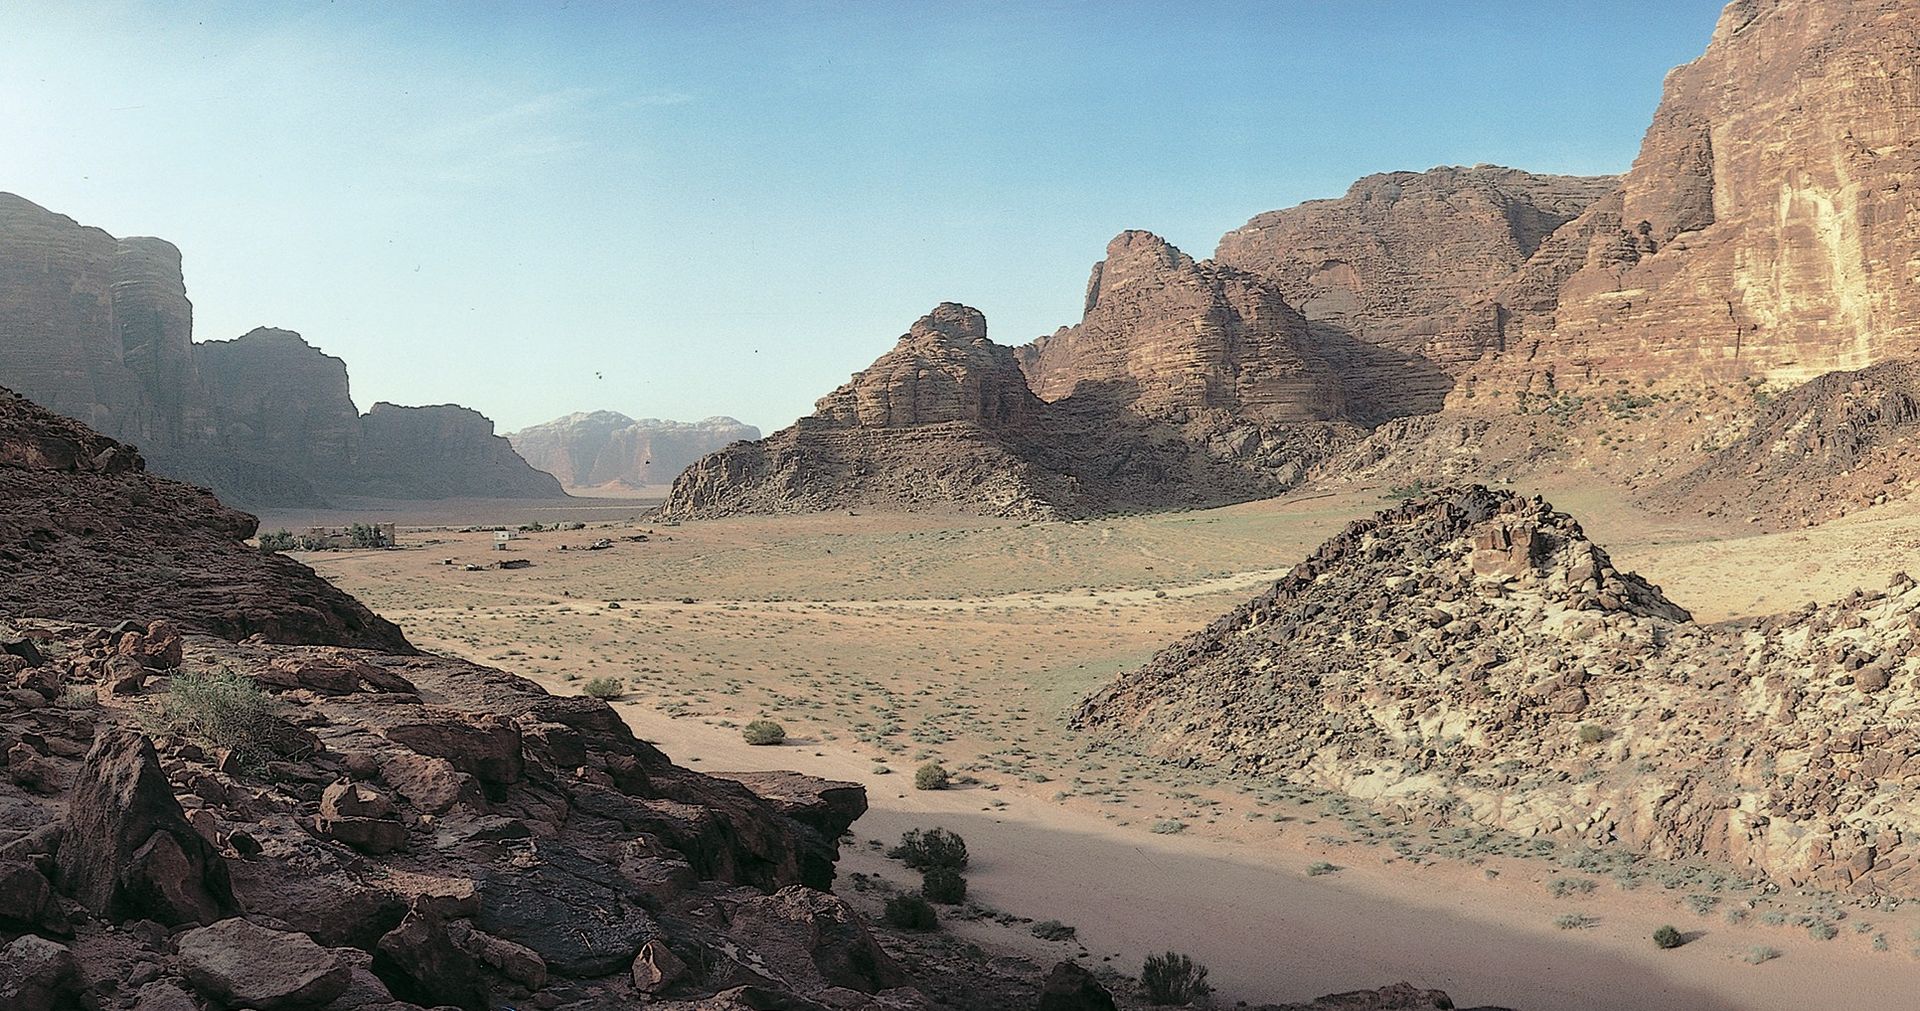 The Wadi Rum looking toward the south. The Wadi is located 30 miles northeast of Aqaba and 190 miles south of Amman, Jordan.